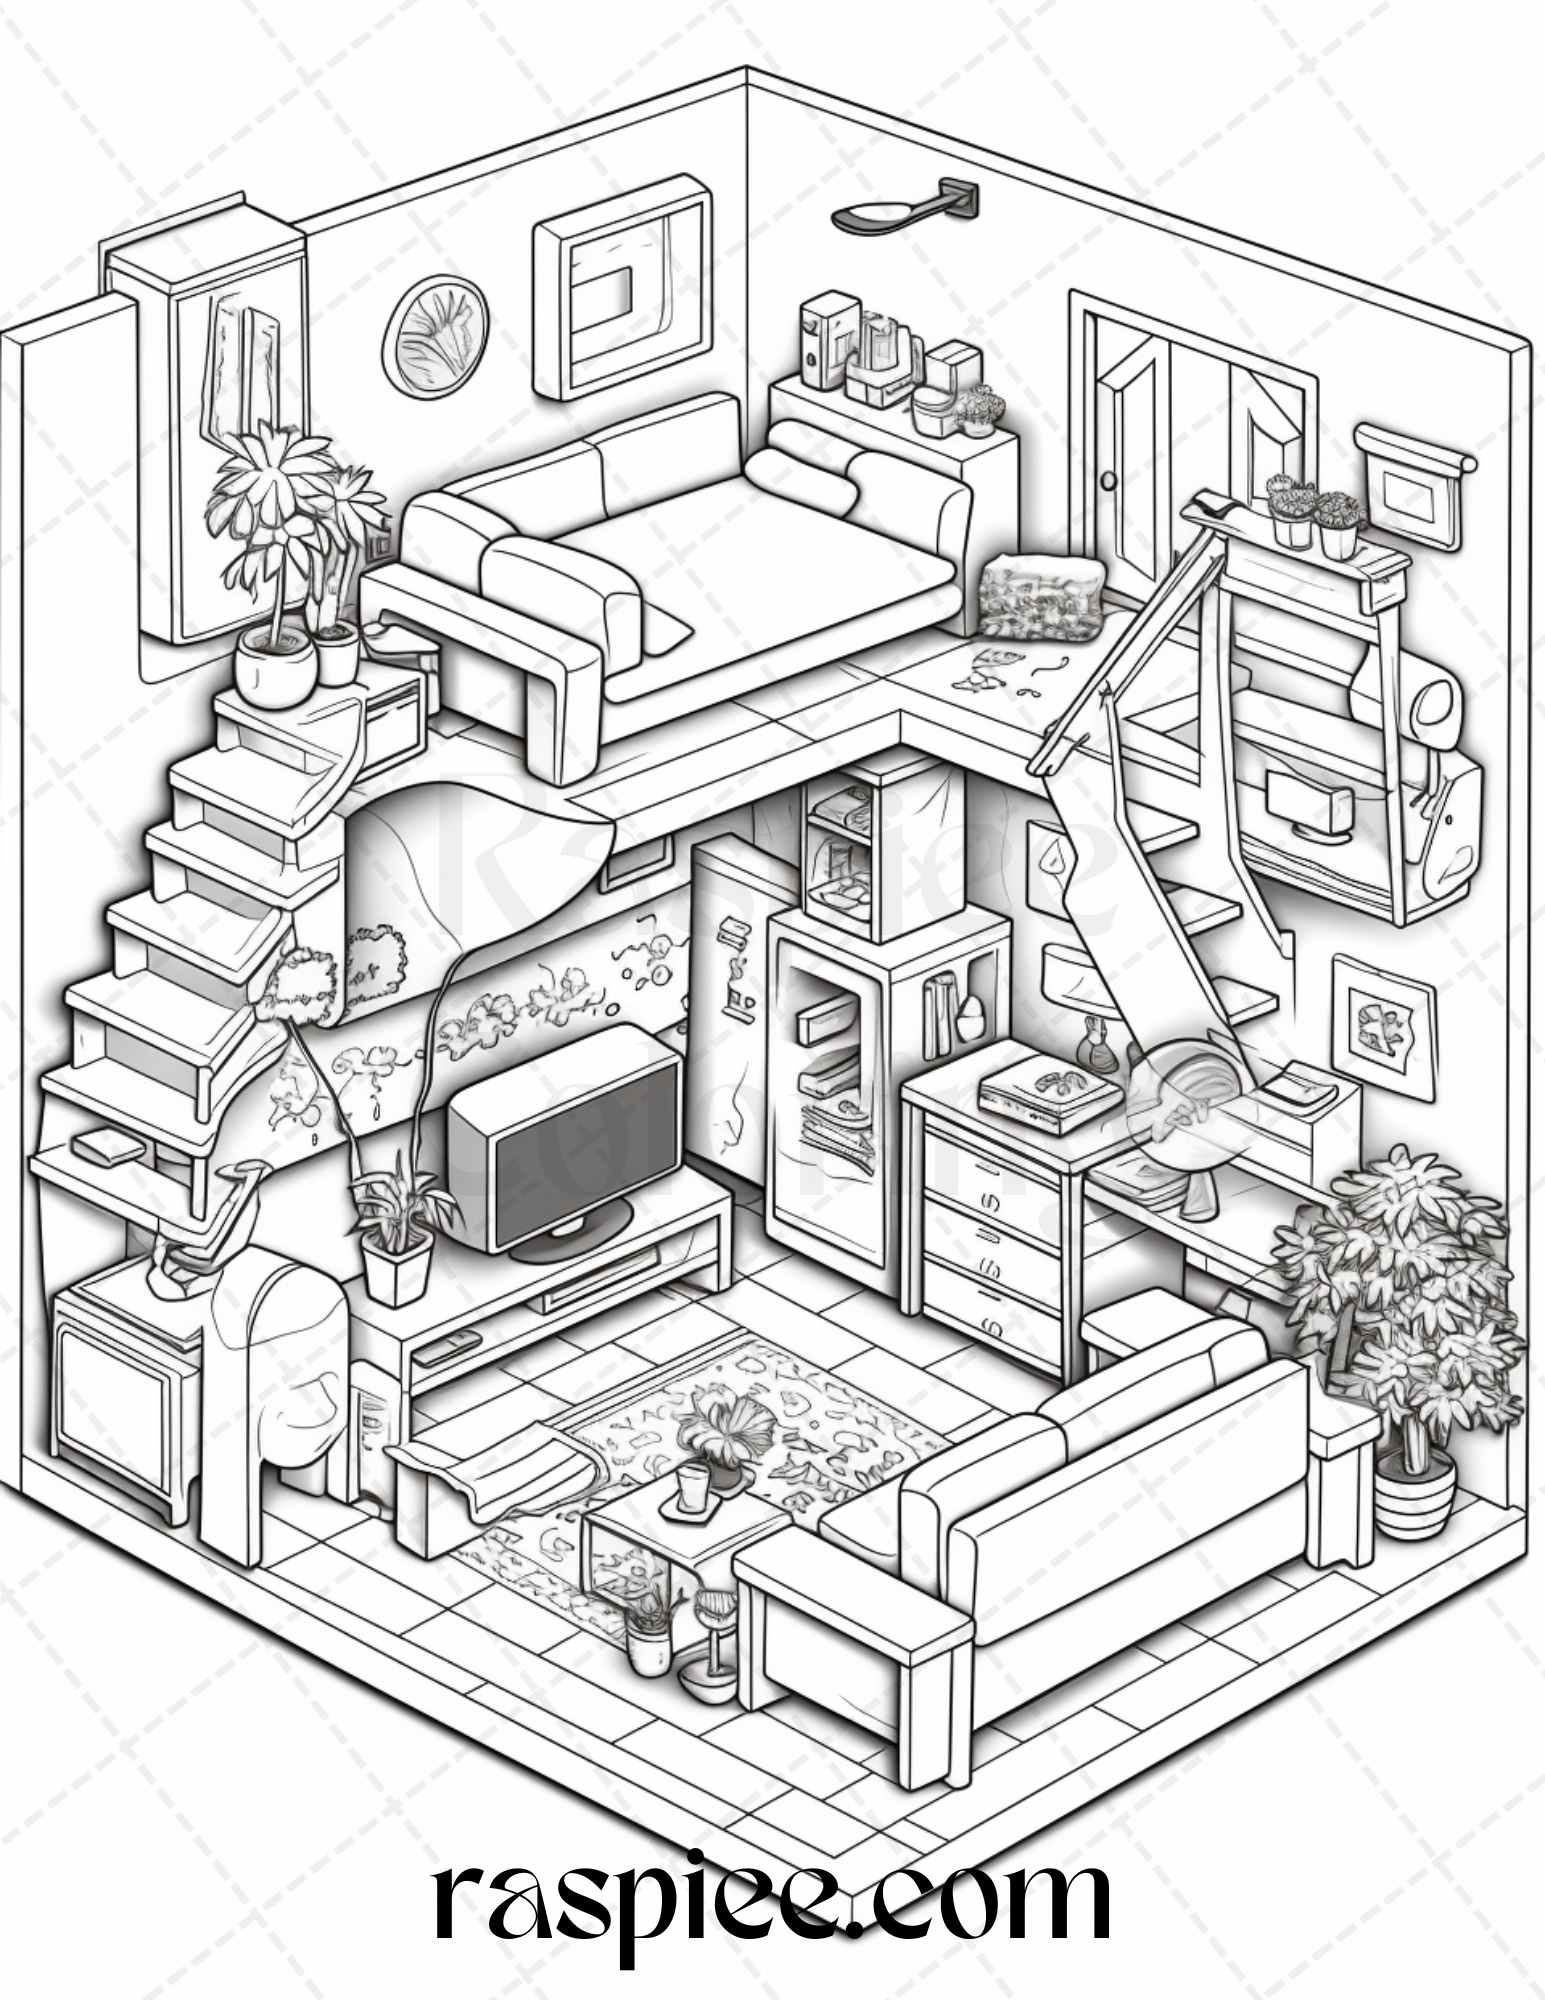 Pocket room coloring pages printable for adults kids pdf file inst â coloring